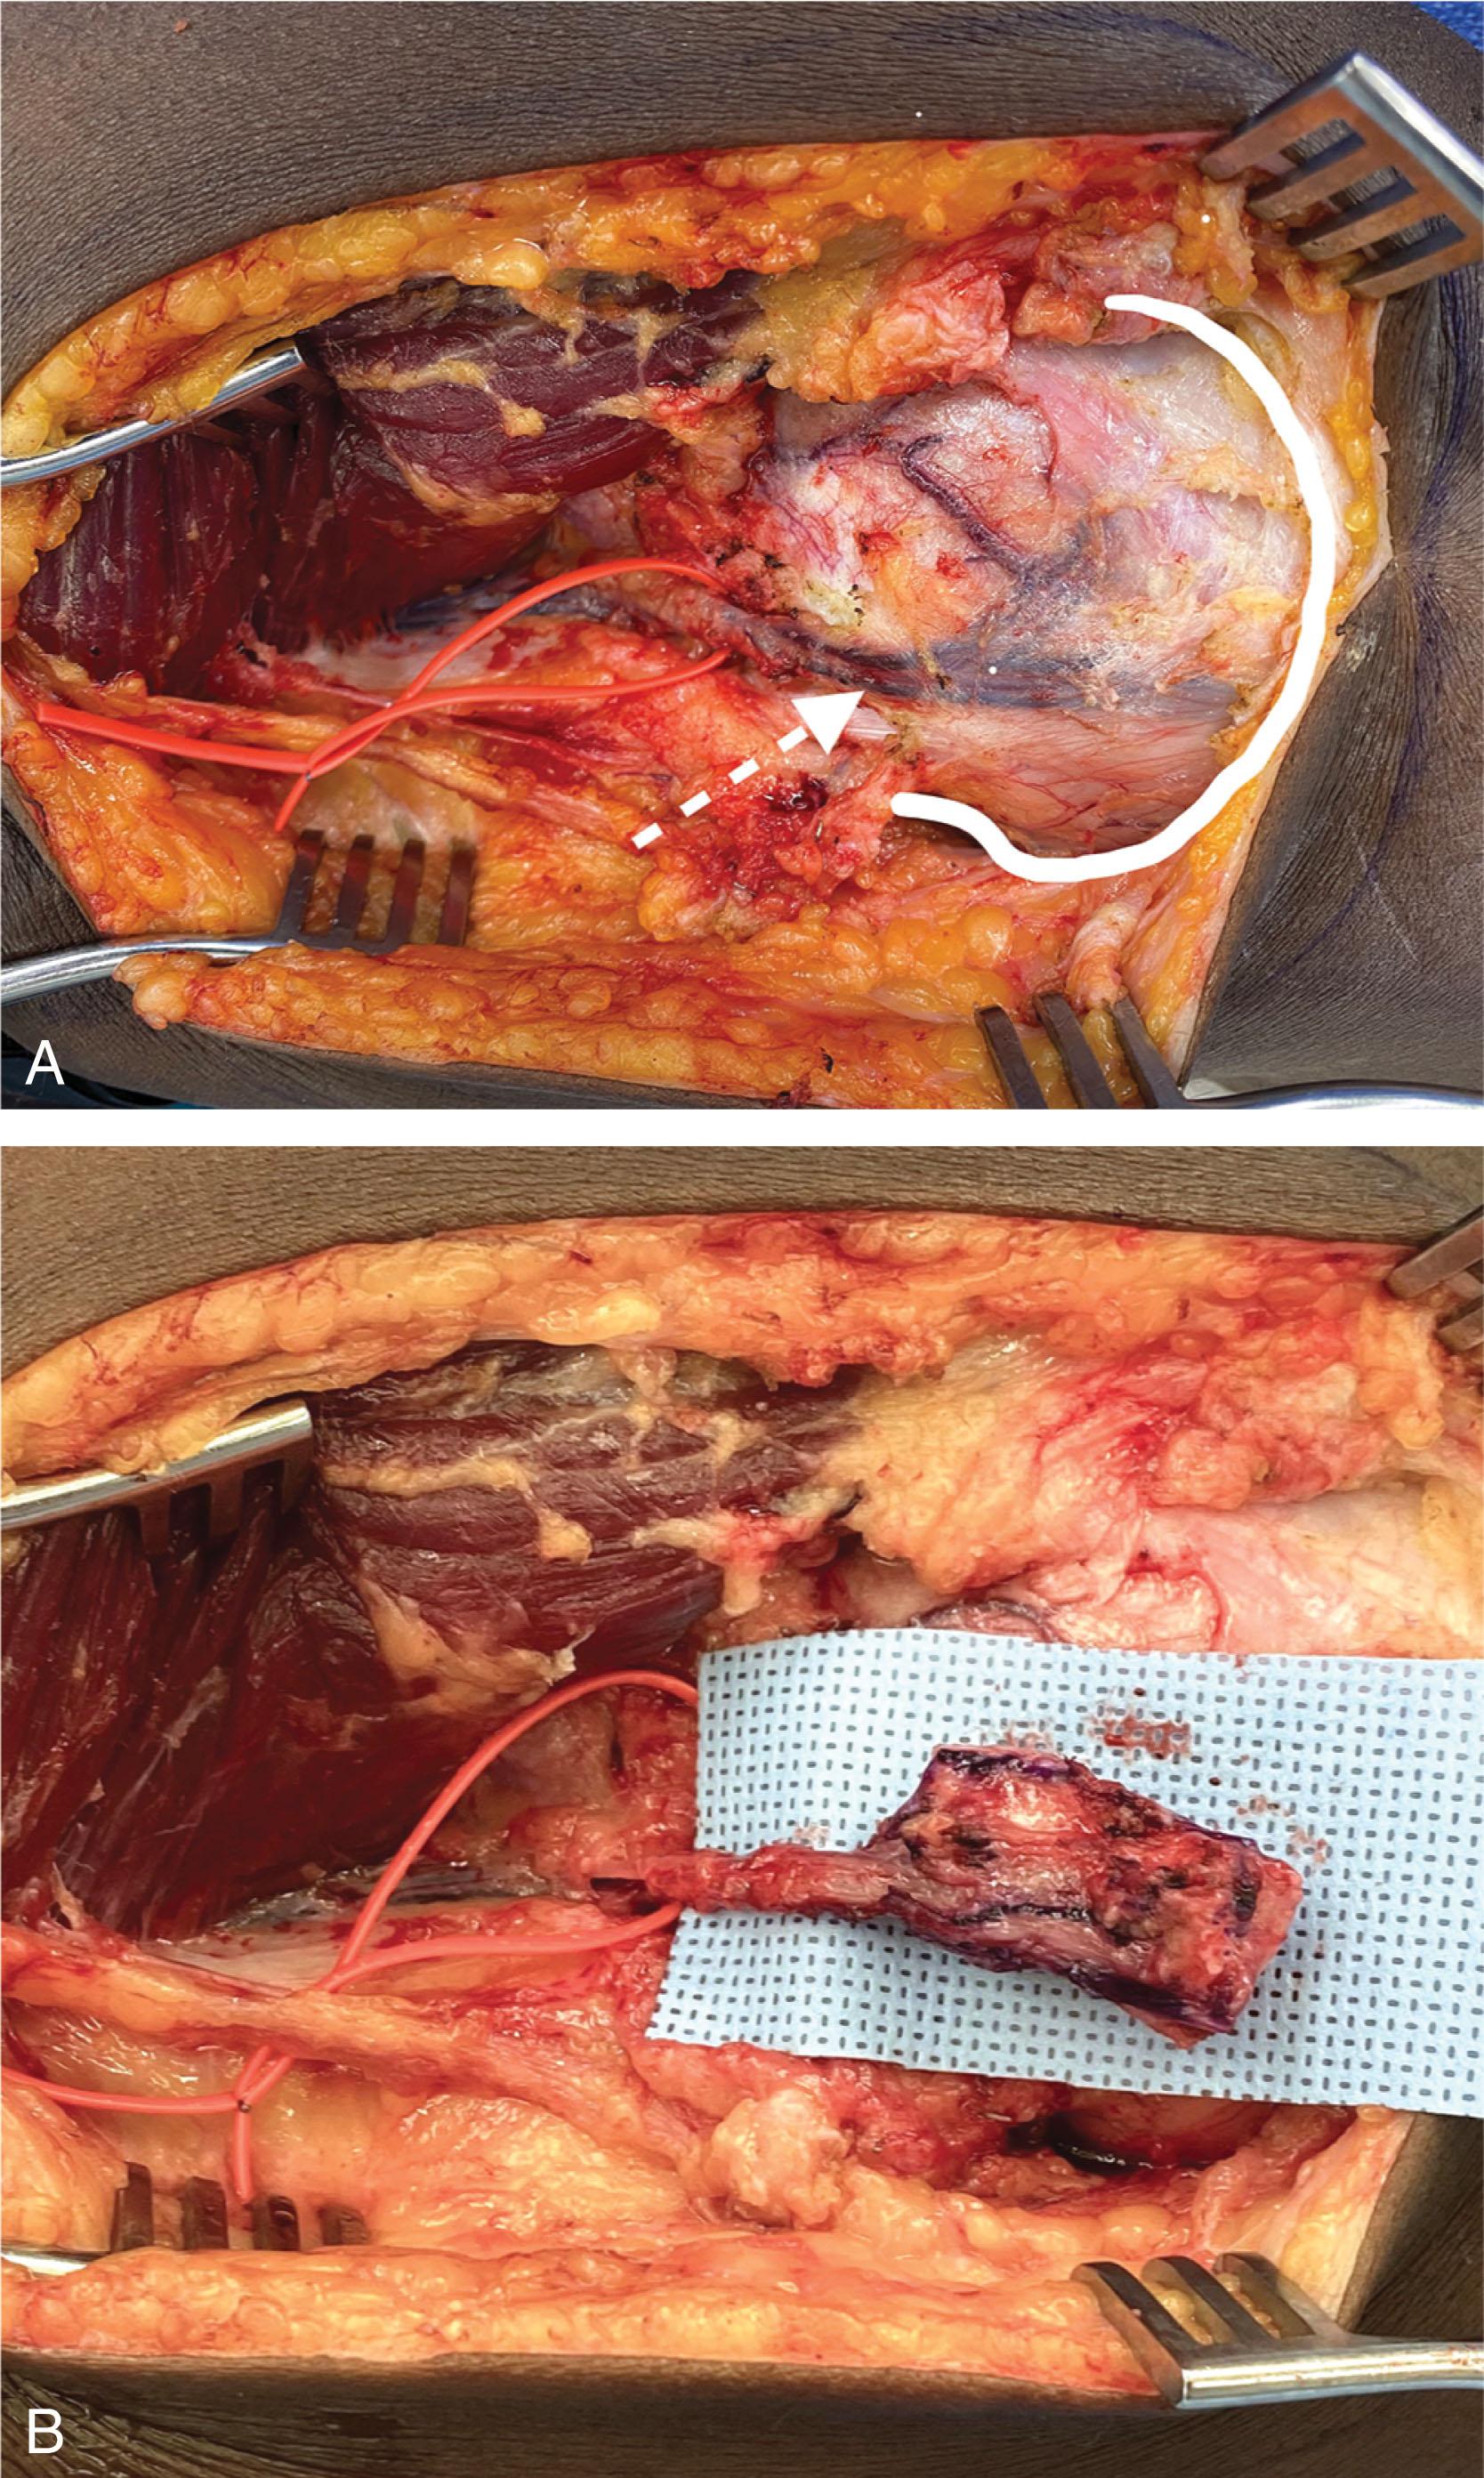 Fig. 42-4, A , The descending medial geniculate artery and vein pedicle of the medial femoral condyle free flap. The medial geniculate vessels (red vessel loop) continue onto the surface of the medial femoral condyle (solid white outline). Note the robust arborization onto the periosteum. B , Harvest of the medial femoral condyle (medial geniculate artery) free flap. A vascularized bone free flap may be customized in length up to the length of the femoral condyle; the width may be up to 4 cm, and the graft depth generally does not exceed 2 cm; grafts larger than this may require internal fixation of the donor site. Back-fill of the donor site may be performed with calcium-based bone void fillers. It is also possible to include articular cartilage with the free flap, which is harvested from the edge of femoral condyle, being situated off the weight-bearing portion the articular surface. The author also utilizes just the periosteum as a free flap.